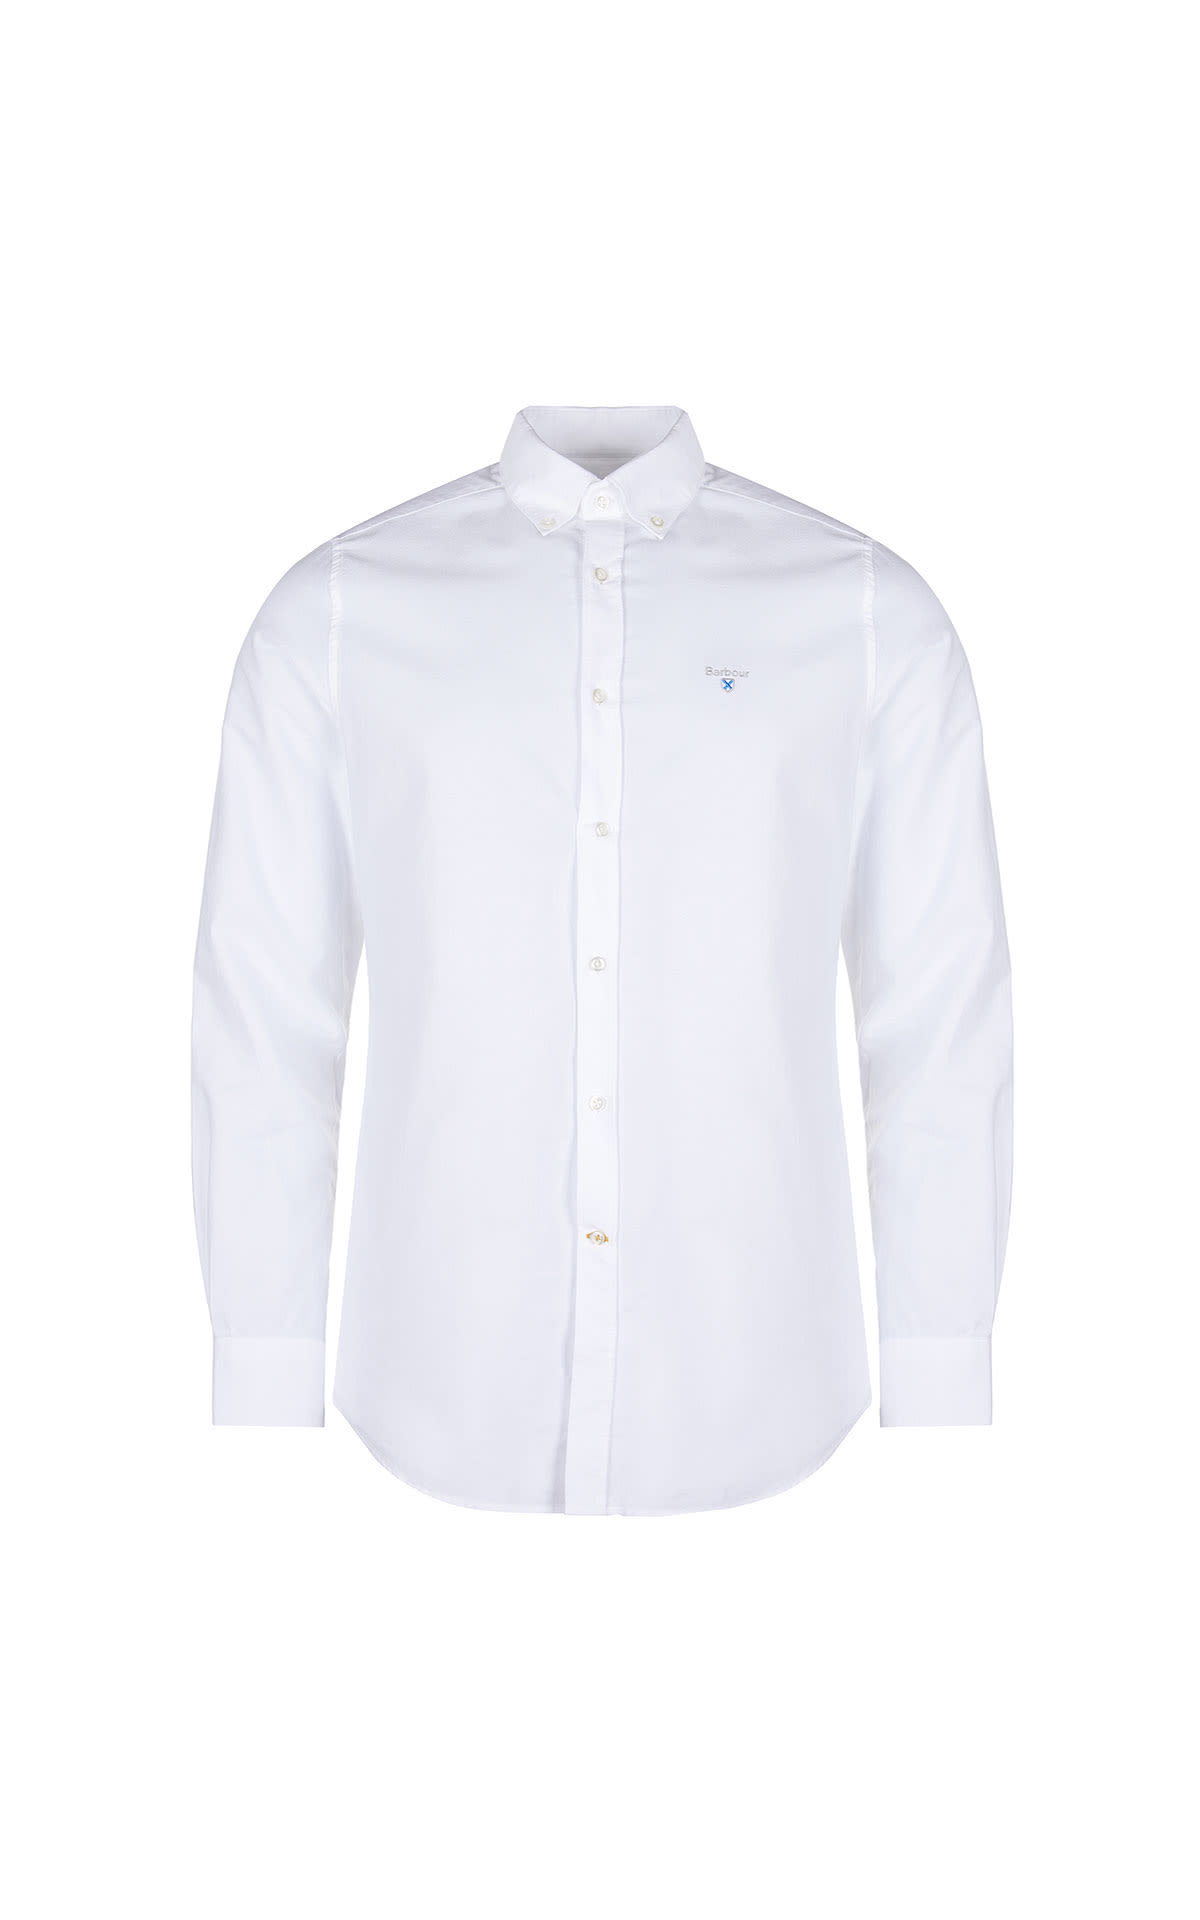 Barbour Oxford 3 tailored shirt white from Bicester Village